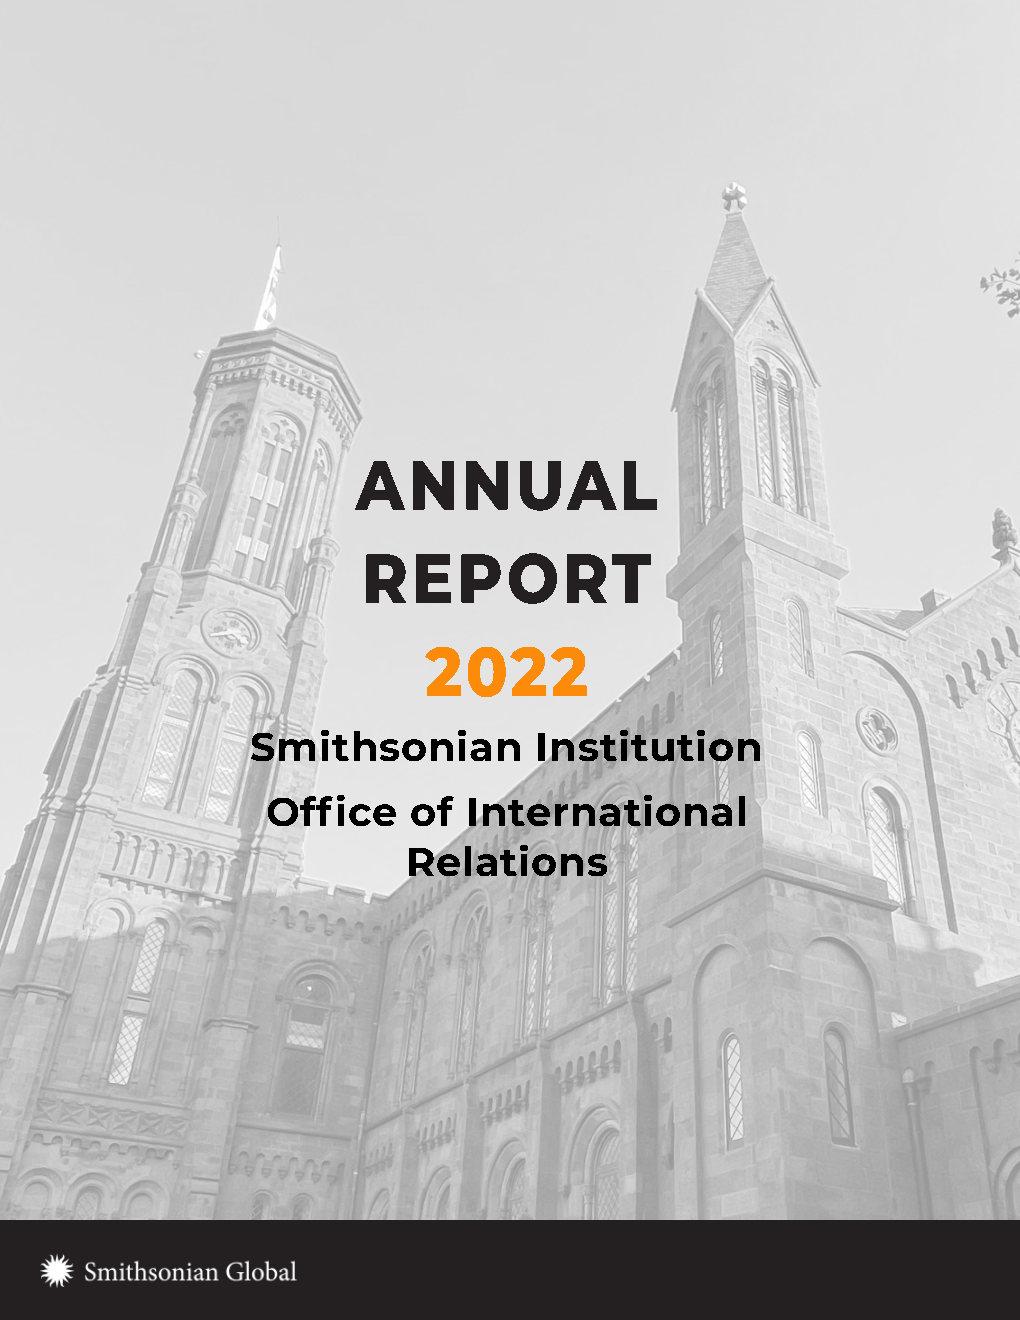 Grayscale view of the Smithsonian Castle in the background with black and orange overlay text reading Annual Report 2022 Smithsonian Institution Office of International Relations